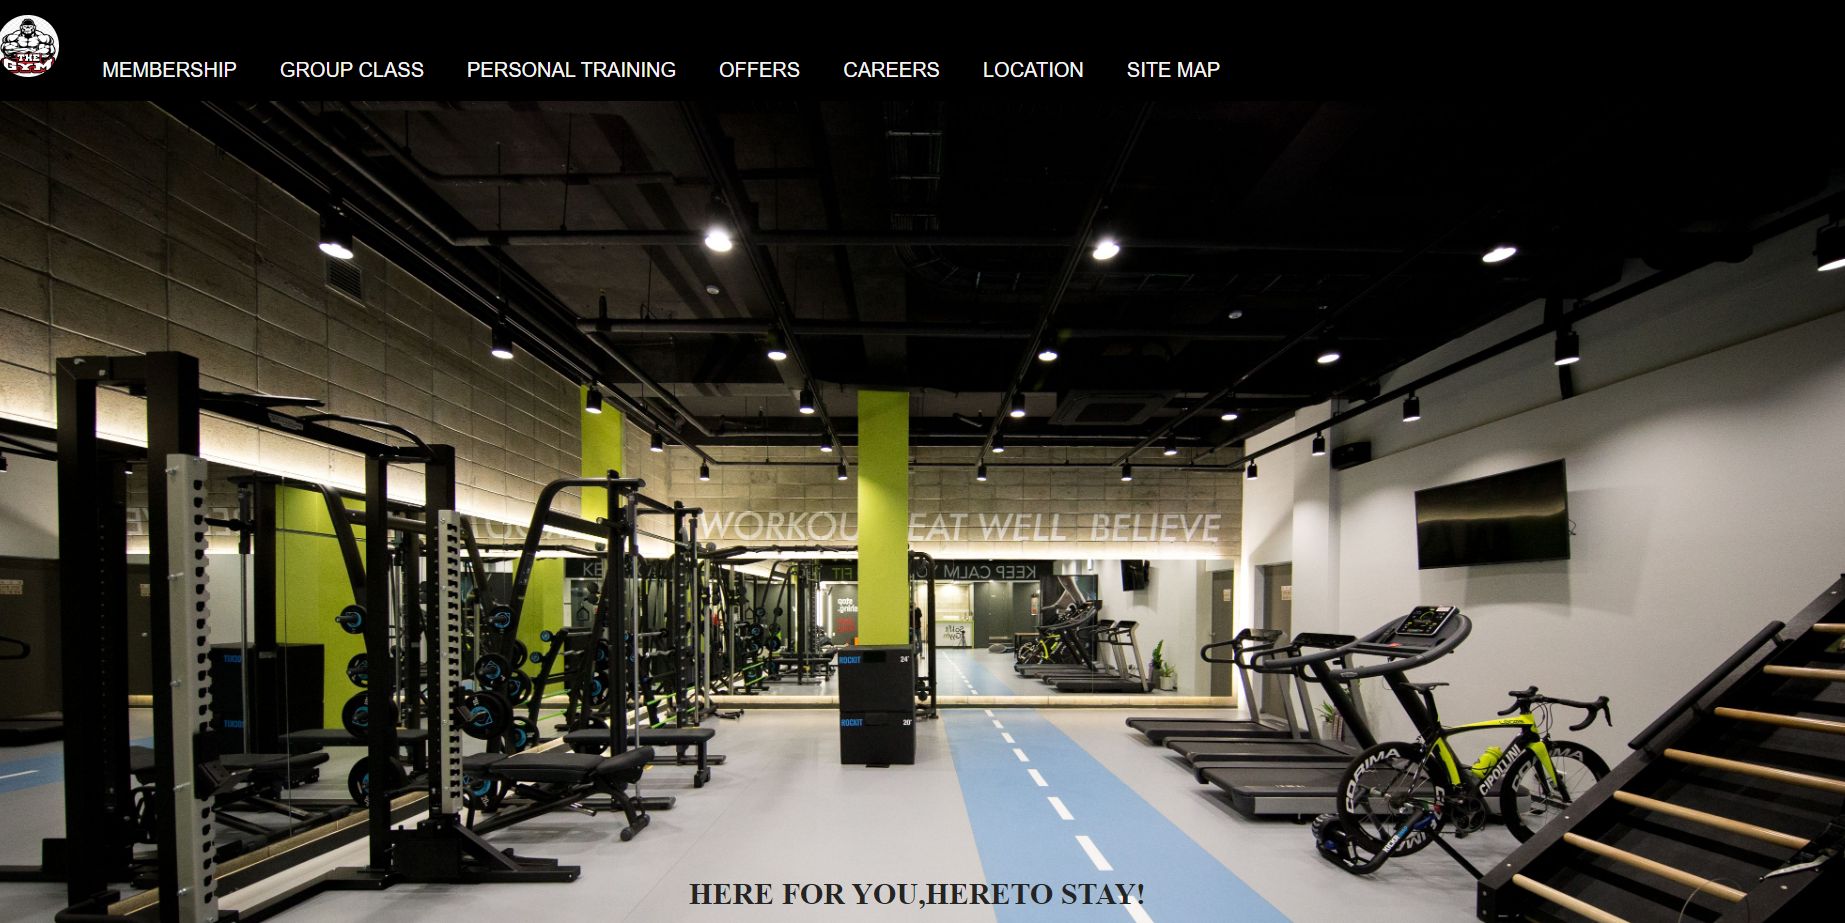 20+ Inspiring Gym Websites - Gym website by using HTML and CSS